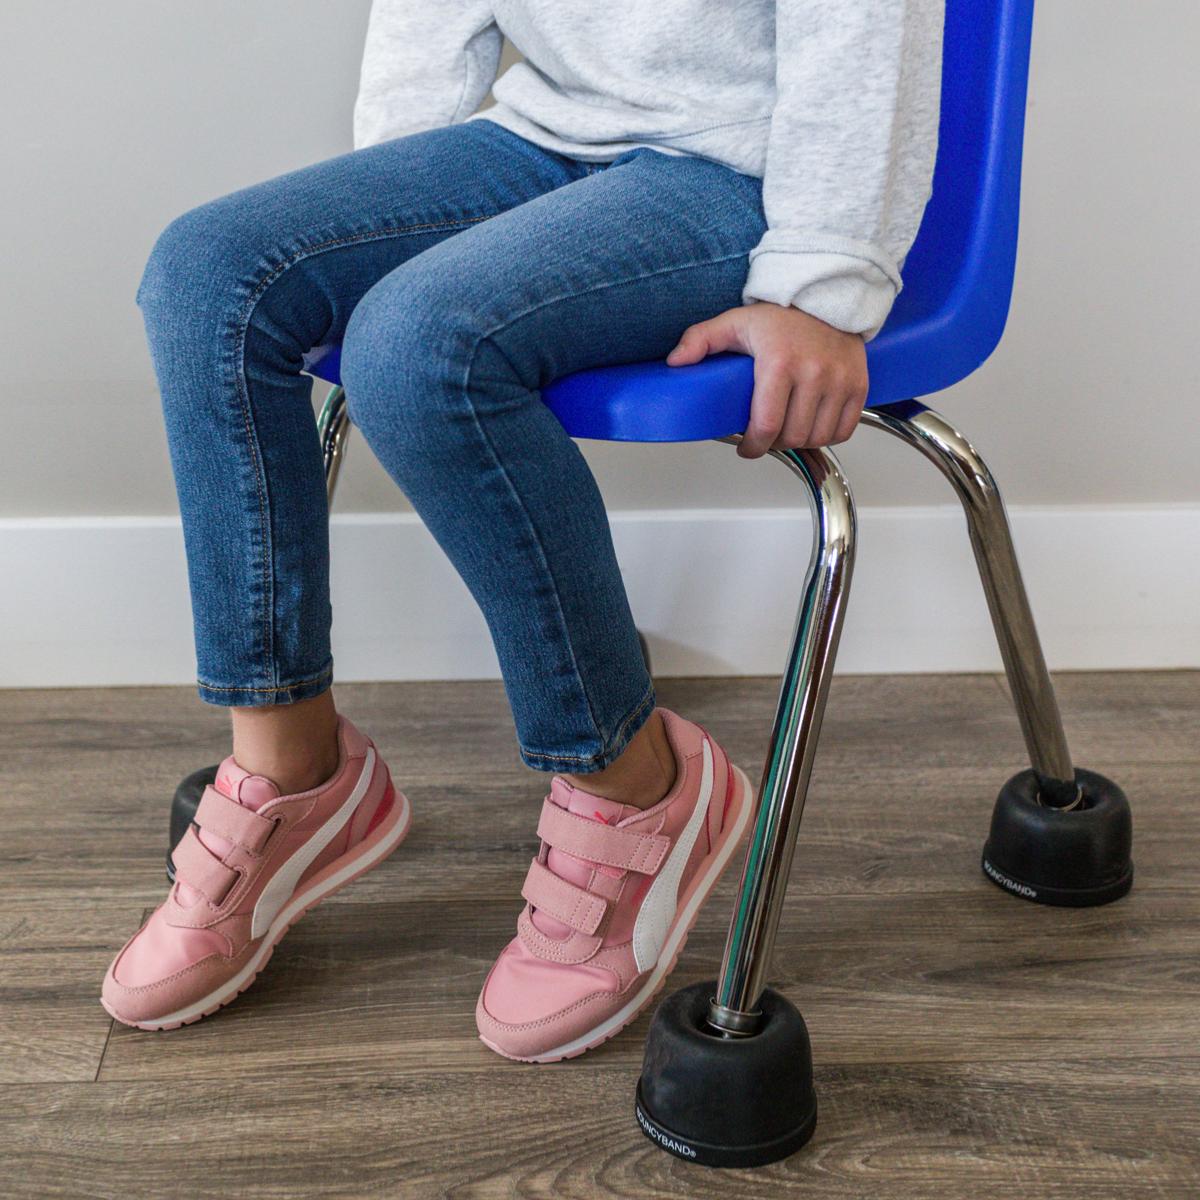 Bouncy Band® Wiggle Wobble Chair Feet - Pieds de chaise Bouncy Band®